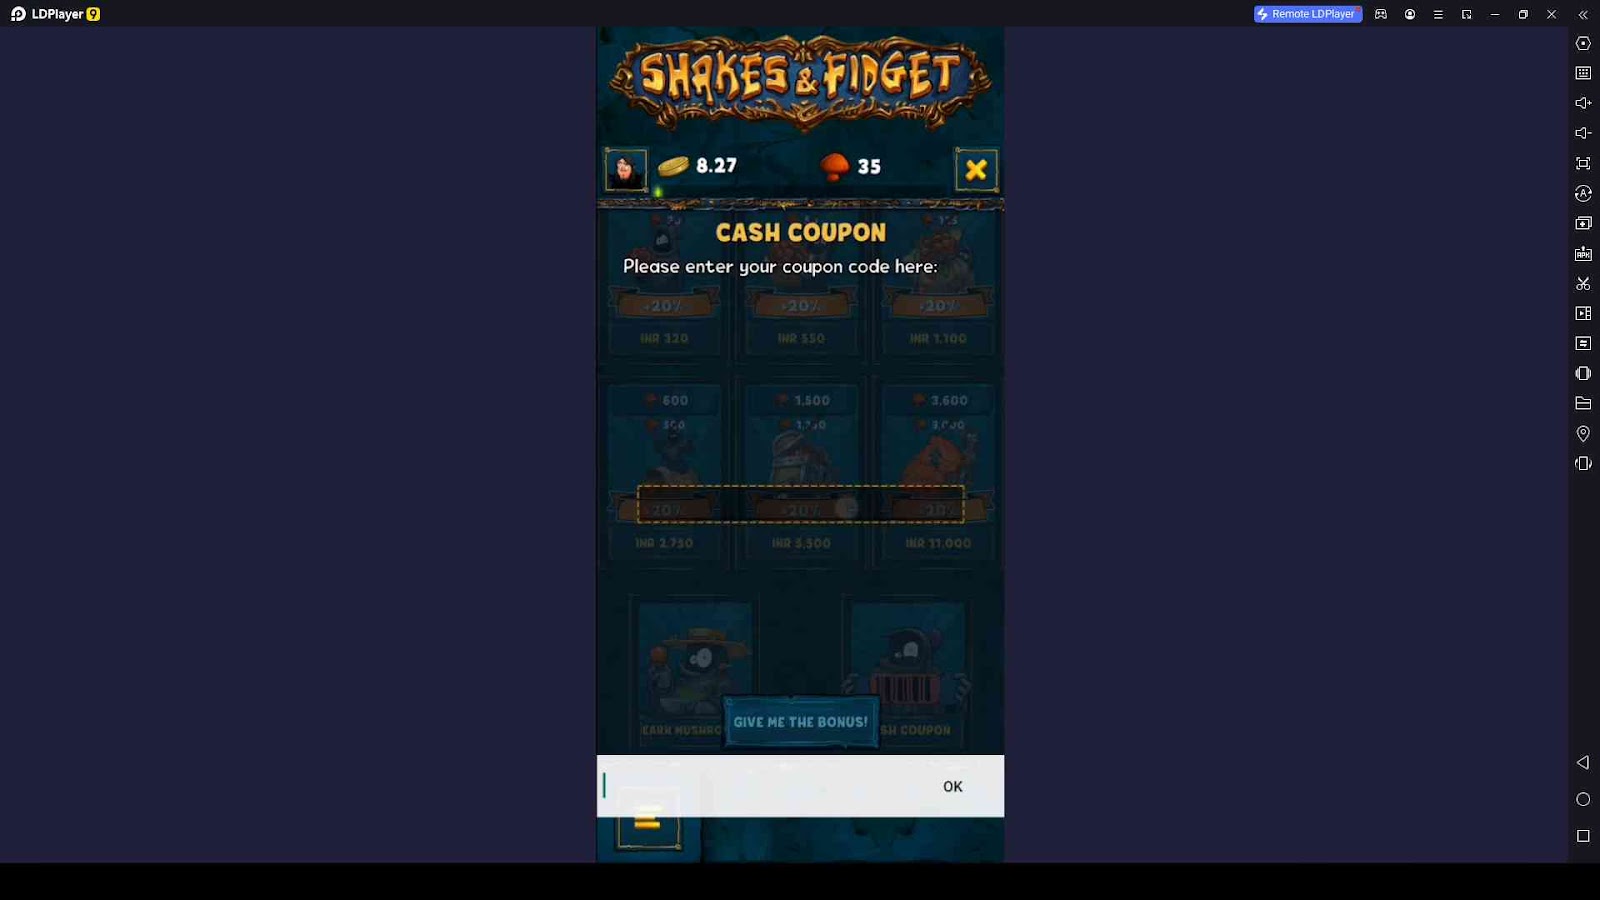 Redeeming Process for the Codes in Shakes & Fidget